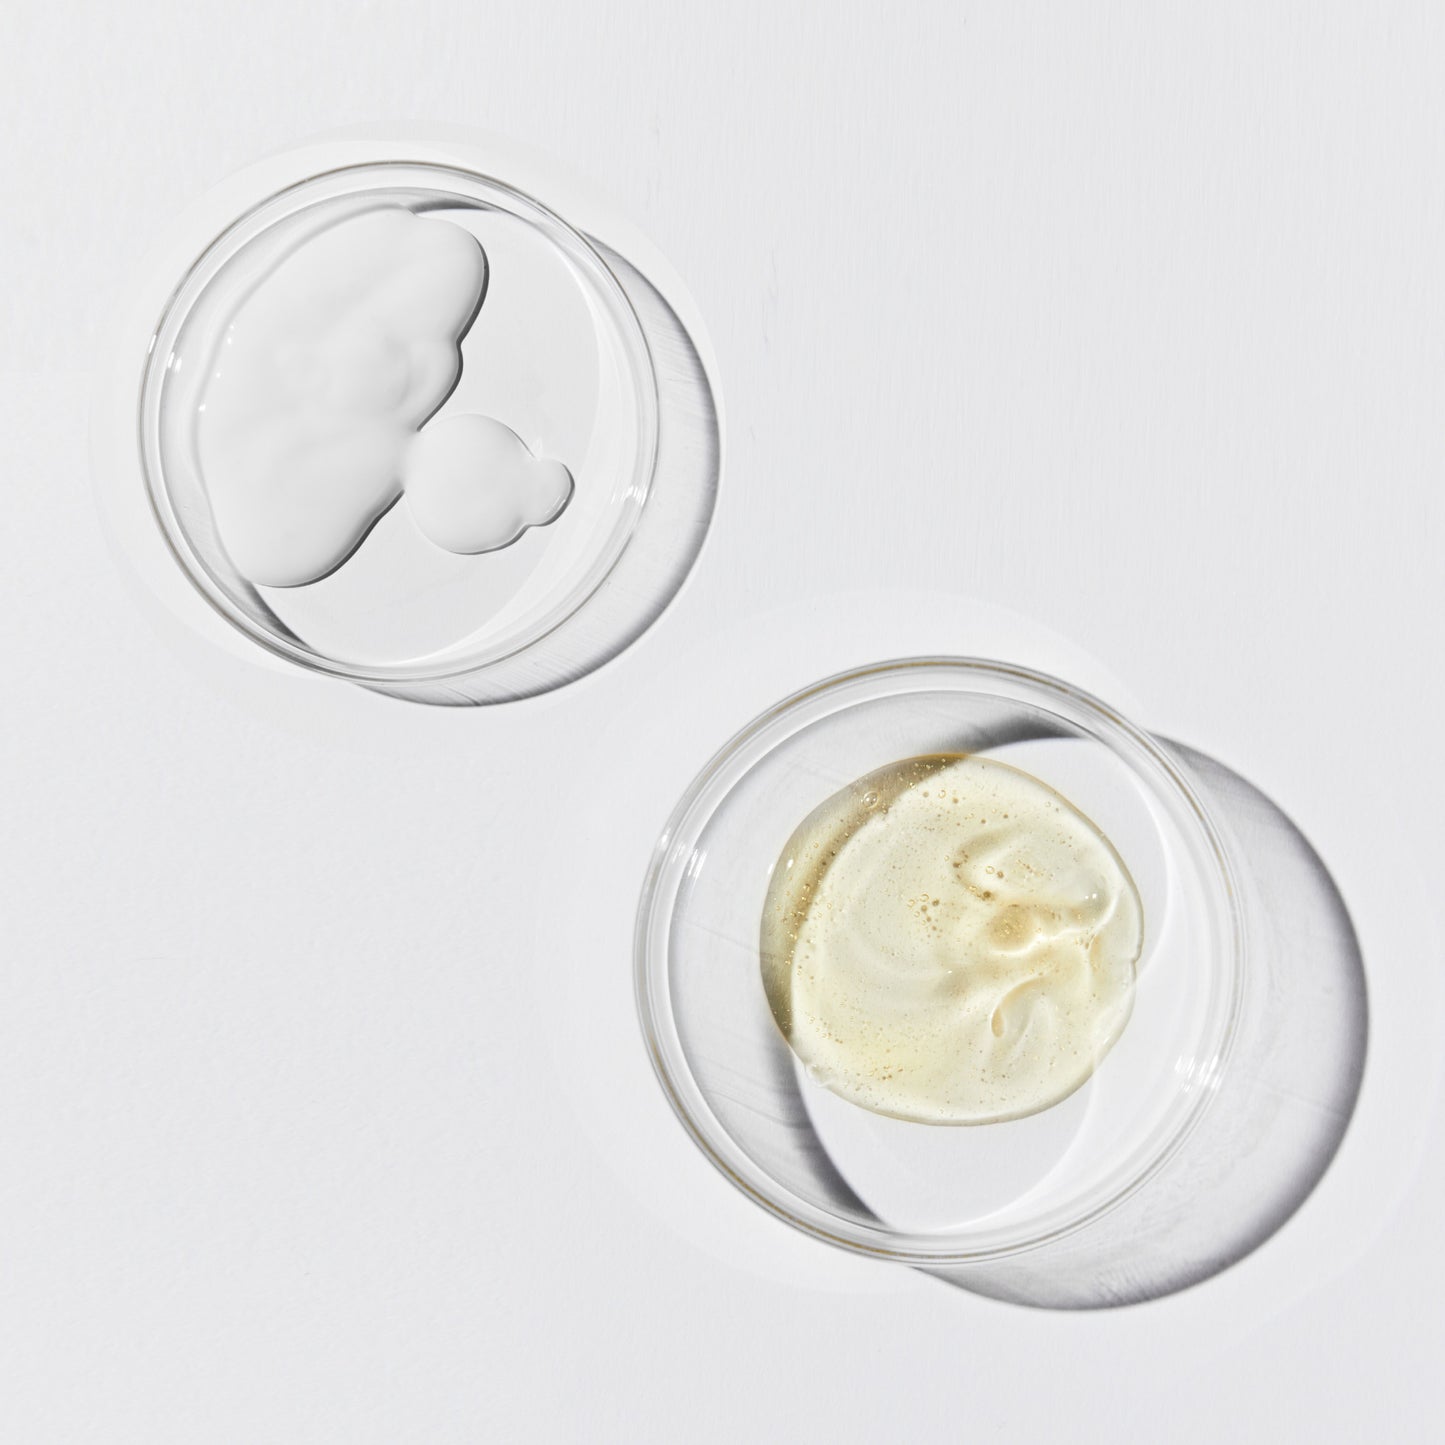 Two shallow, clear dishes. One contains a white opaque liquid, the other a translucent yellow liquid.